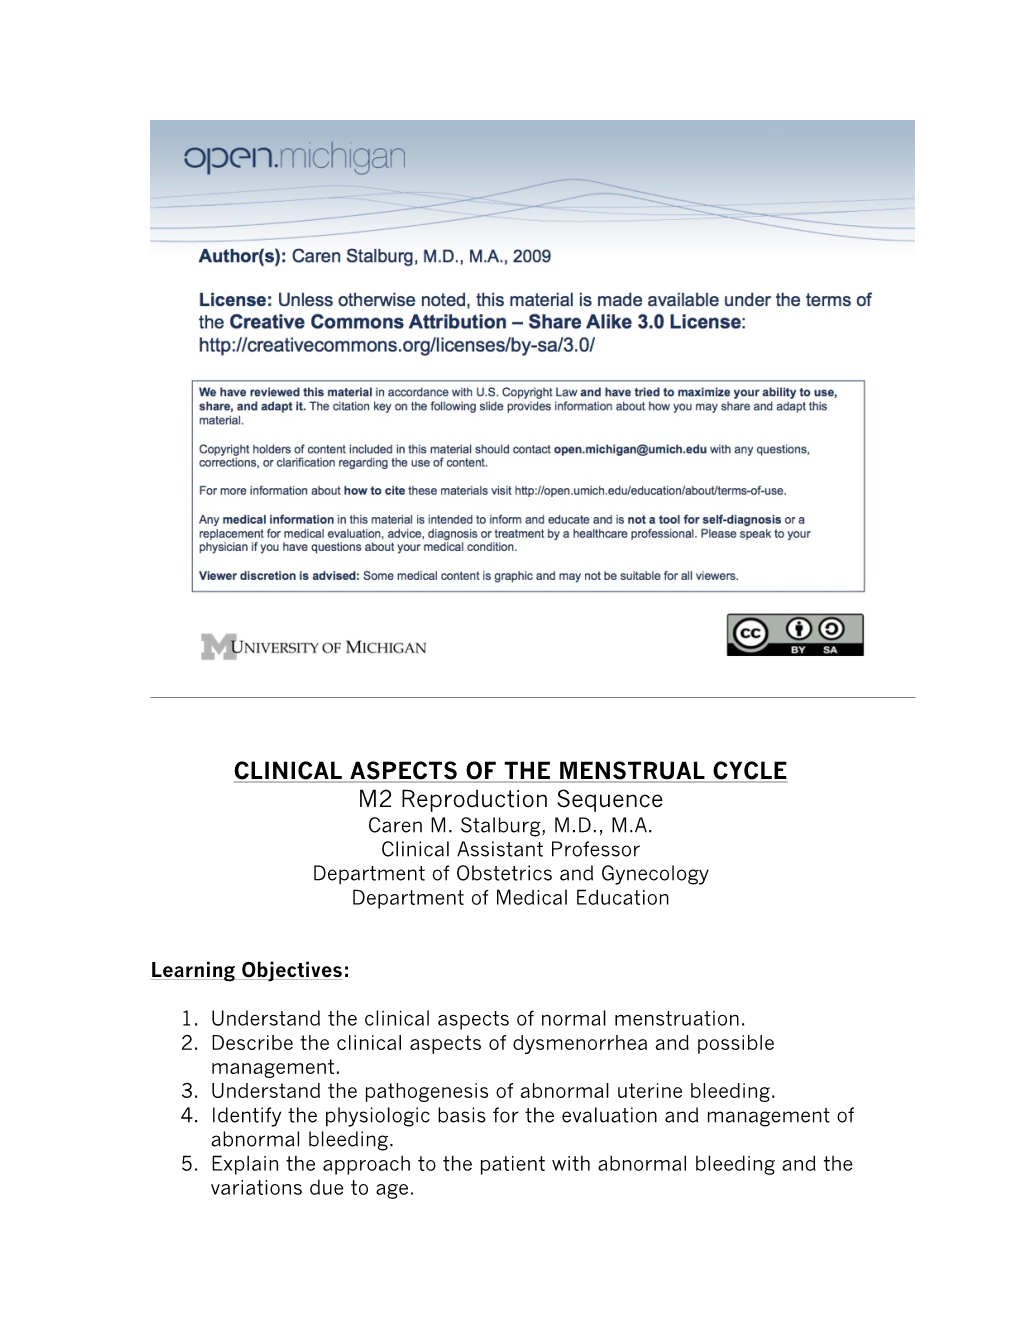 CLINICAL ASPECTS of the MENSTRUAL CYCLE M2 Reproduction Sequence Caren M